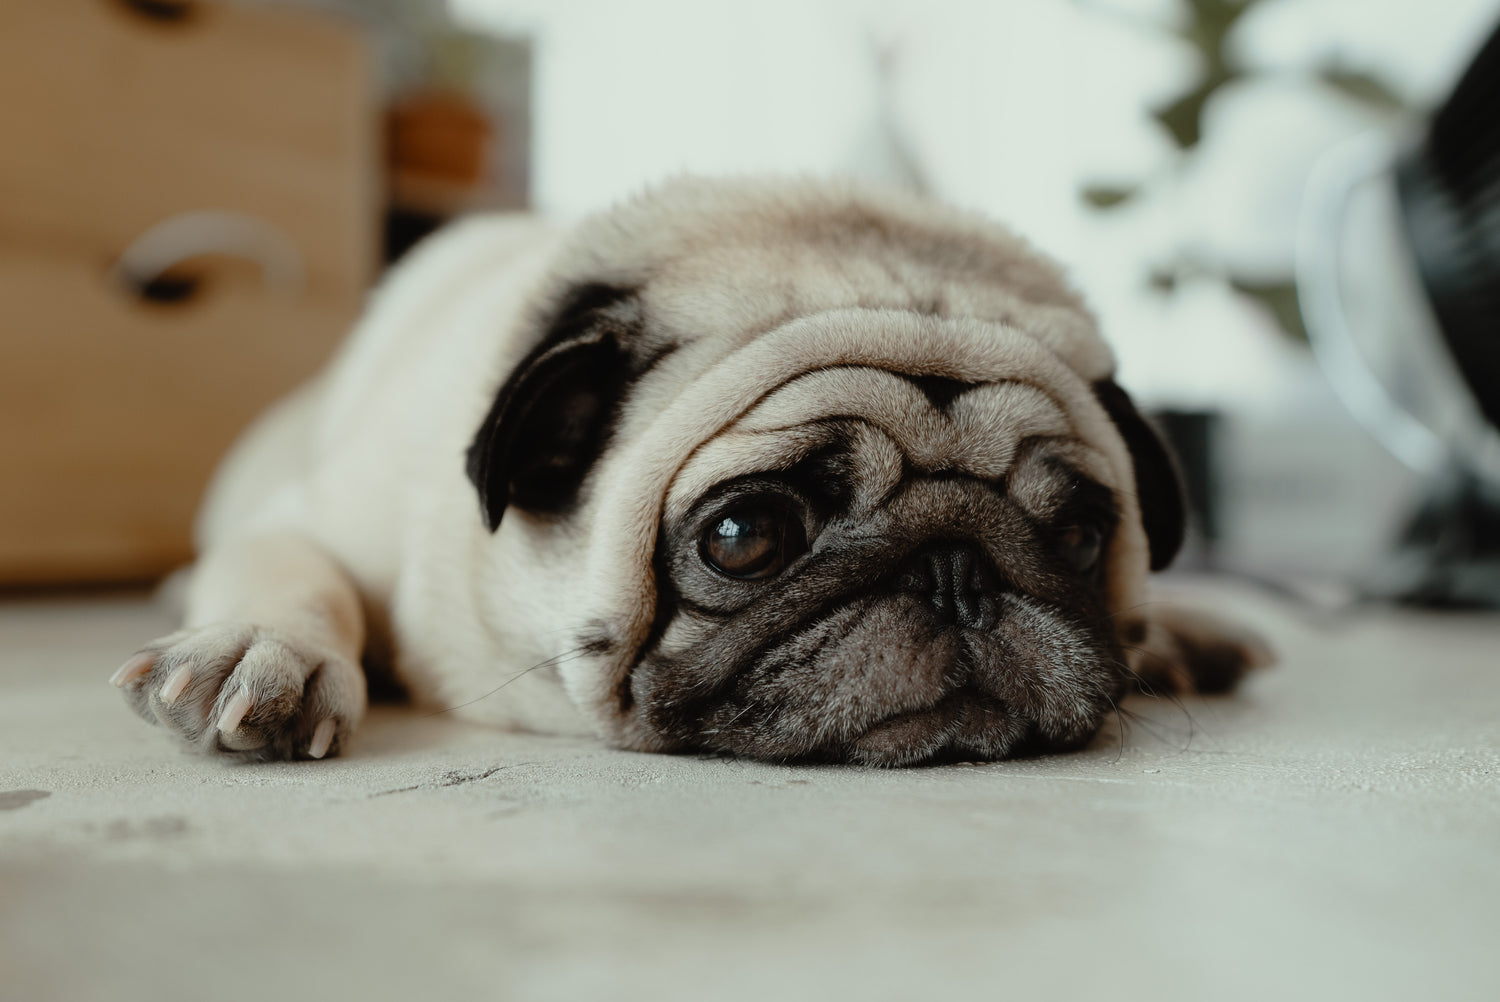 What are the causes and symptoms of pancreatitis in dogs?